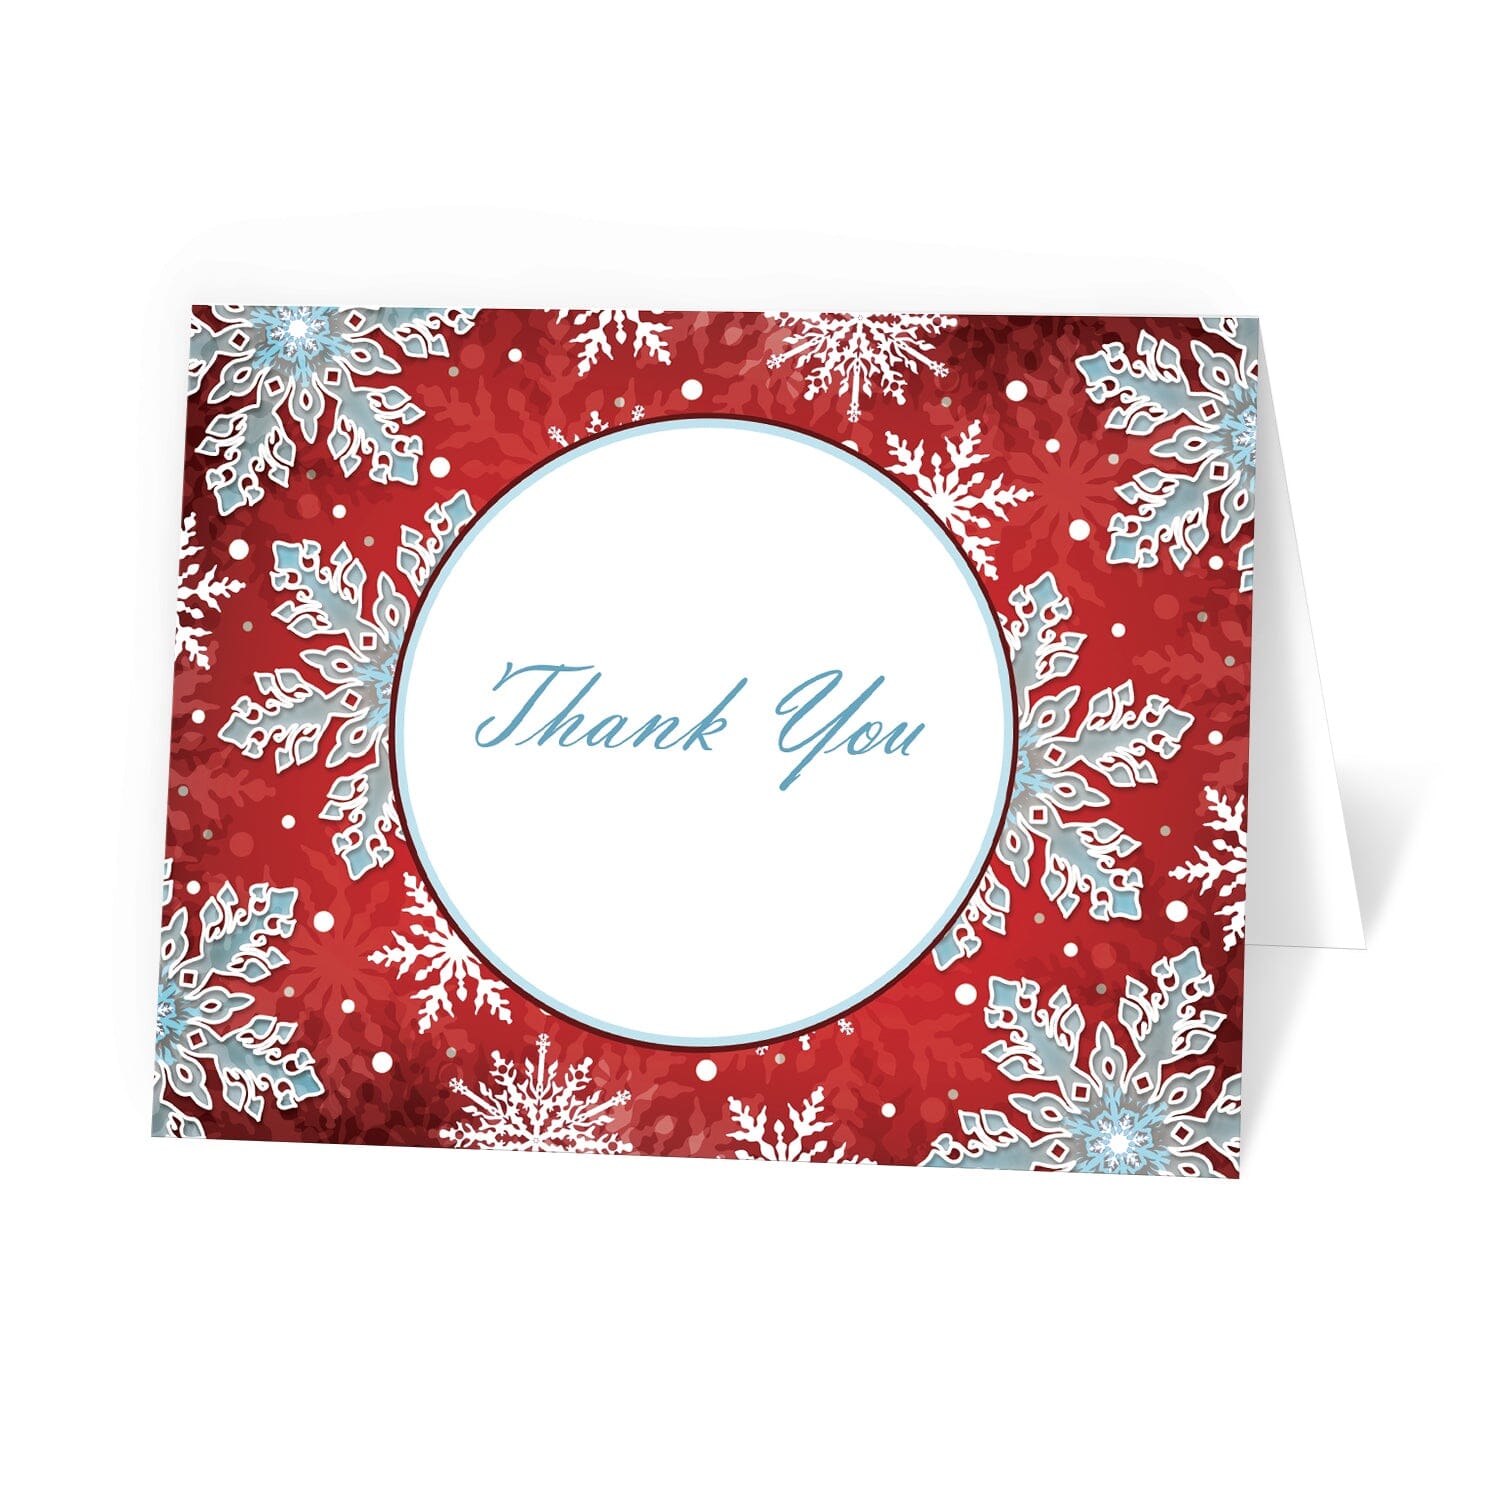 Modern Red White Blue Snowflake Thank You Cards at Artistically Invited.